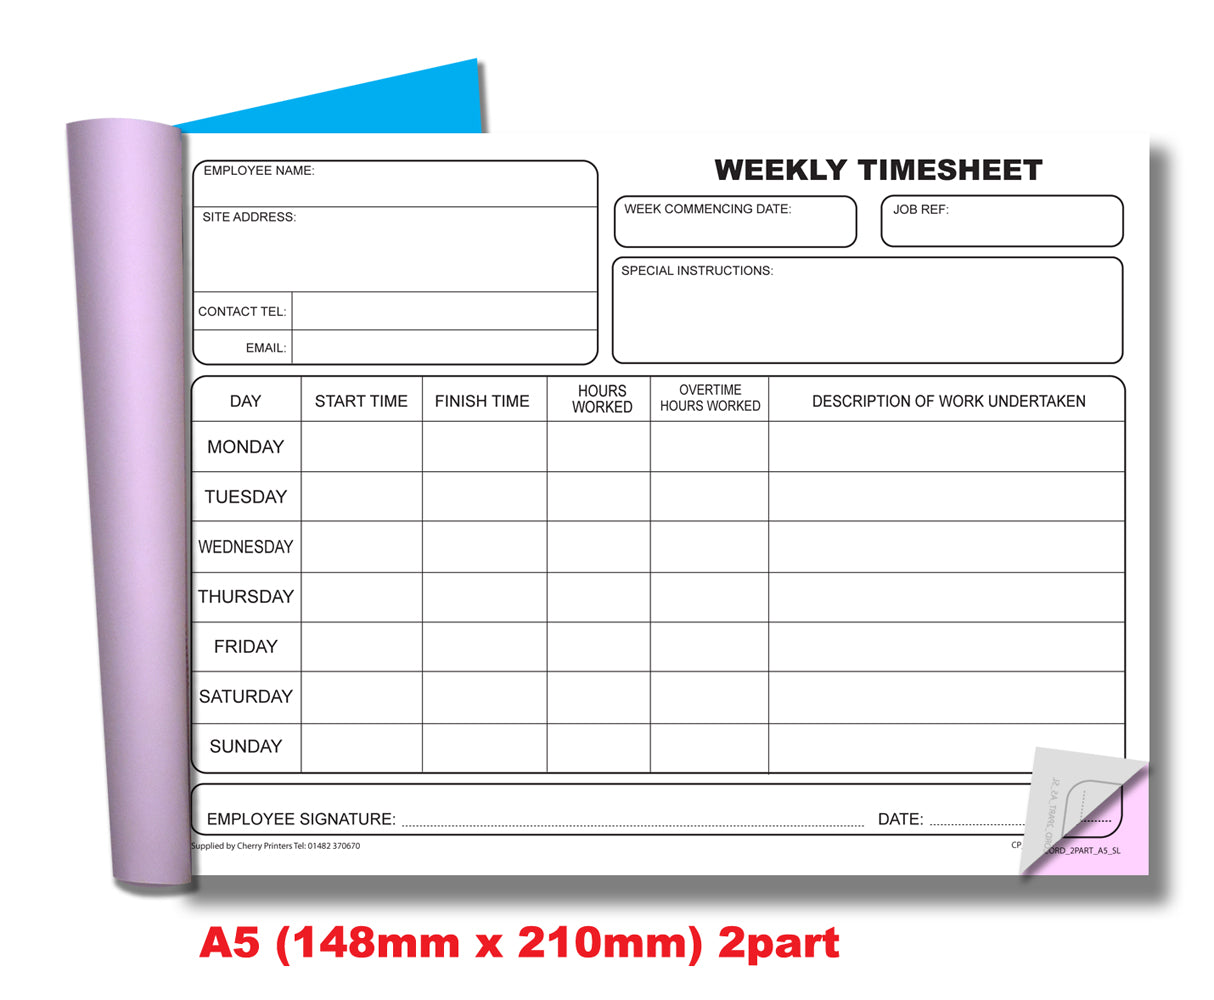 NCR Weekly Timesheet Book A5 Duplicate S+L 40 sets per book